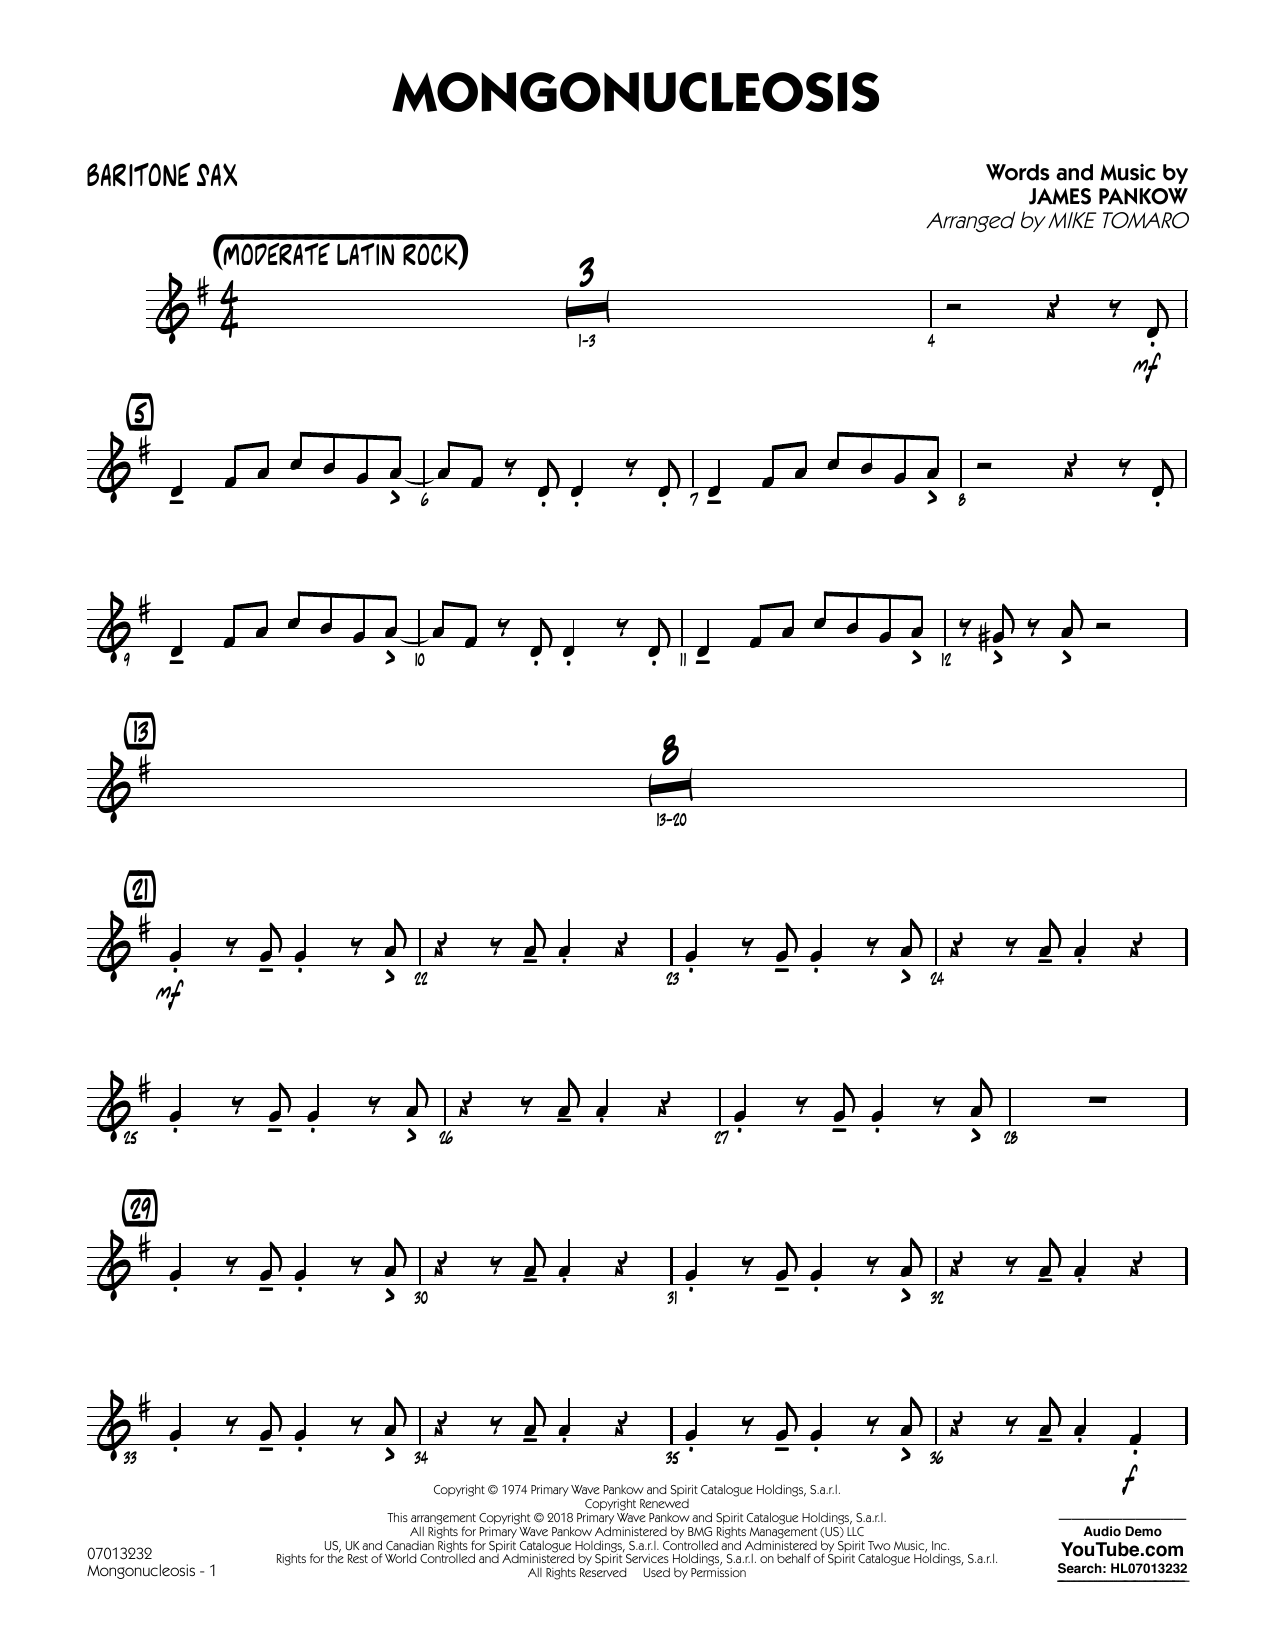 Chicago Mongonucleosis (arr. Mike Tomaro) - Baritone Sax sheet music preview music notes and score for Jazz Ensemble including 3 page(s)